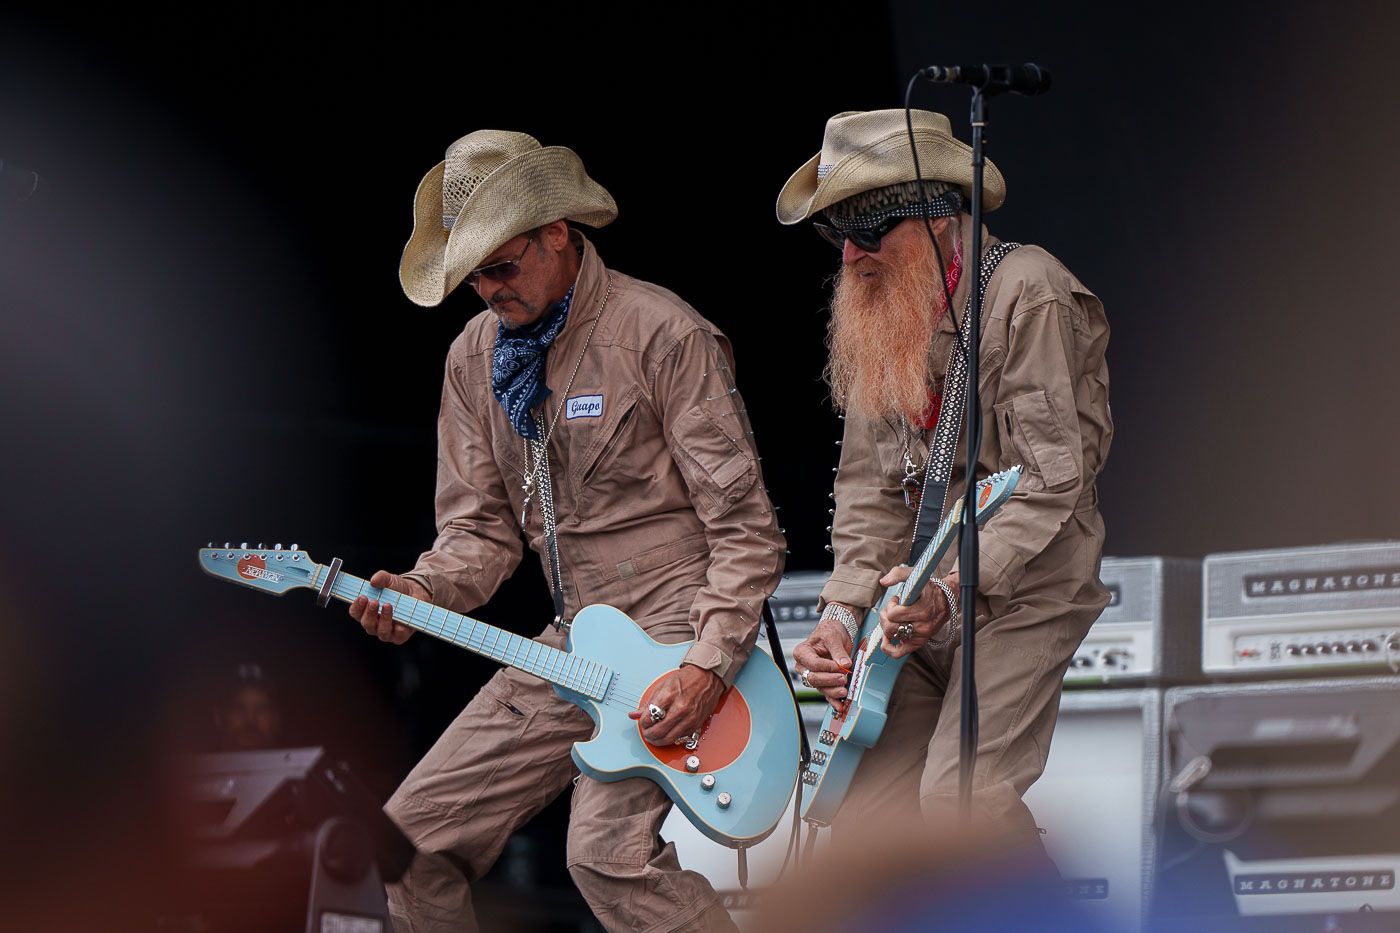 Billy F Gibbons @ Copenhell